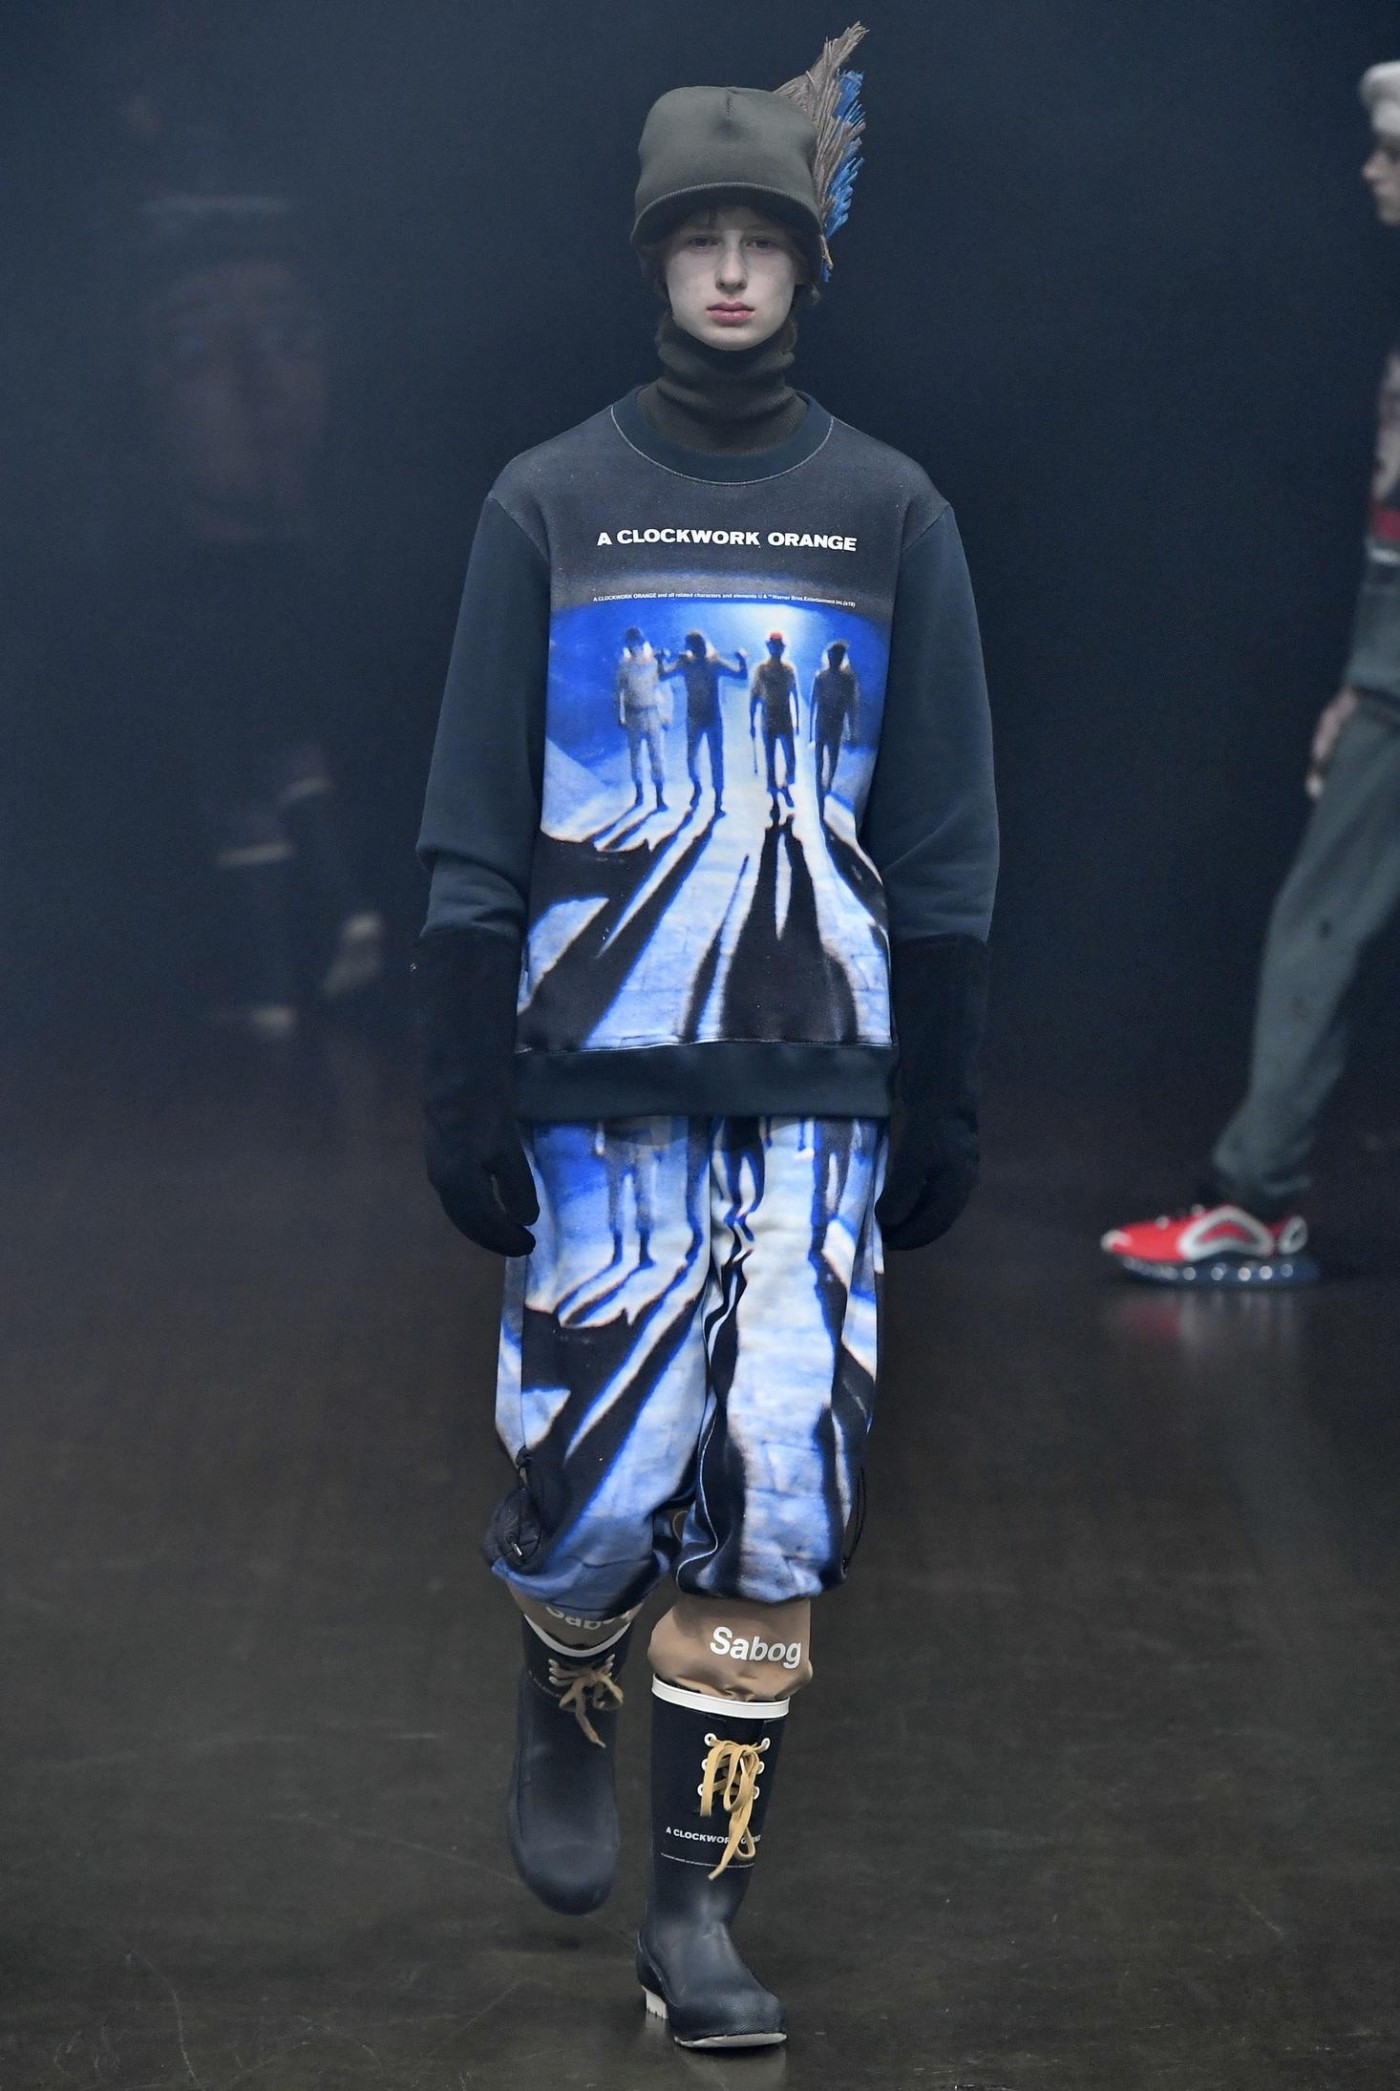 Six dominant trends from Men’s Fashion Week 2019 | EDITED